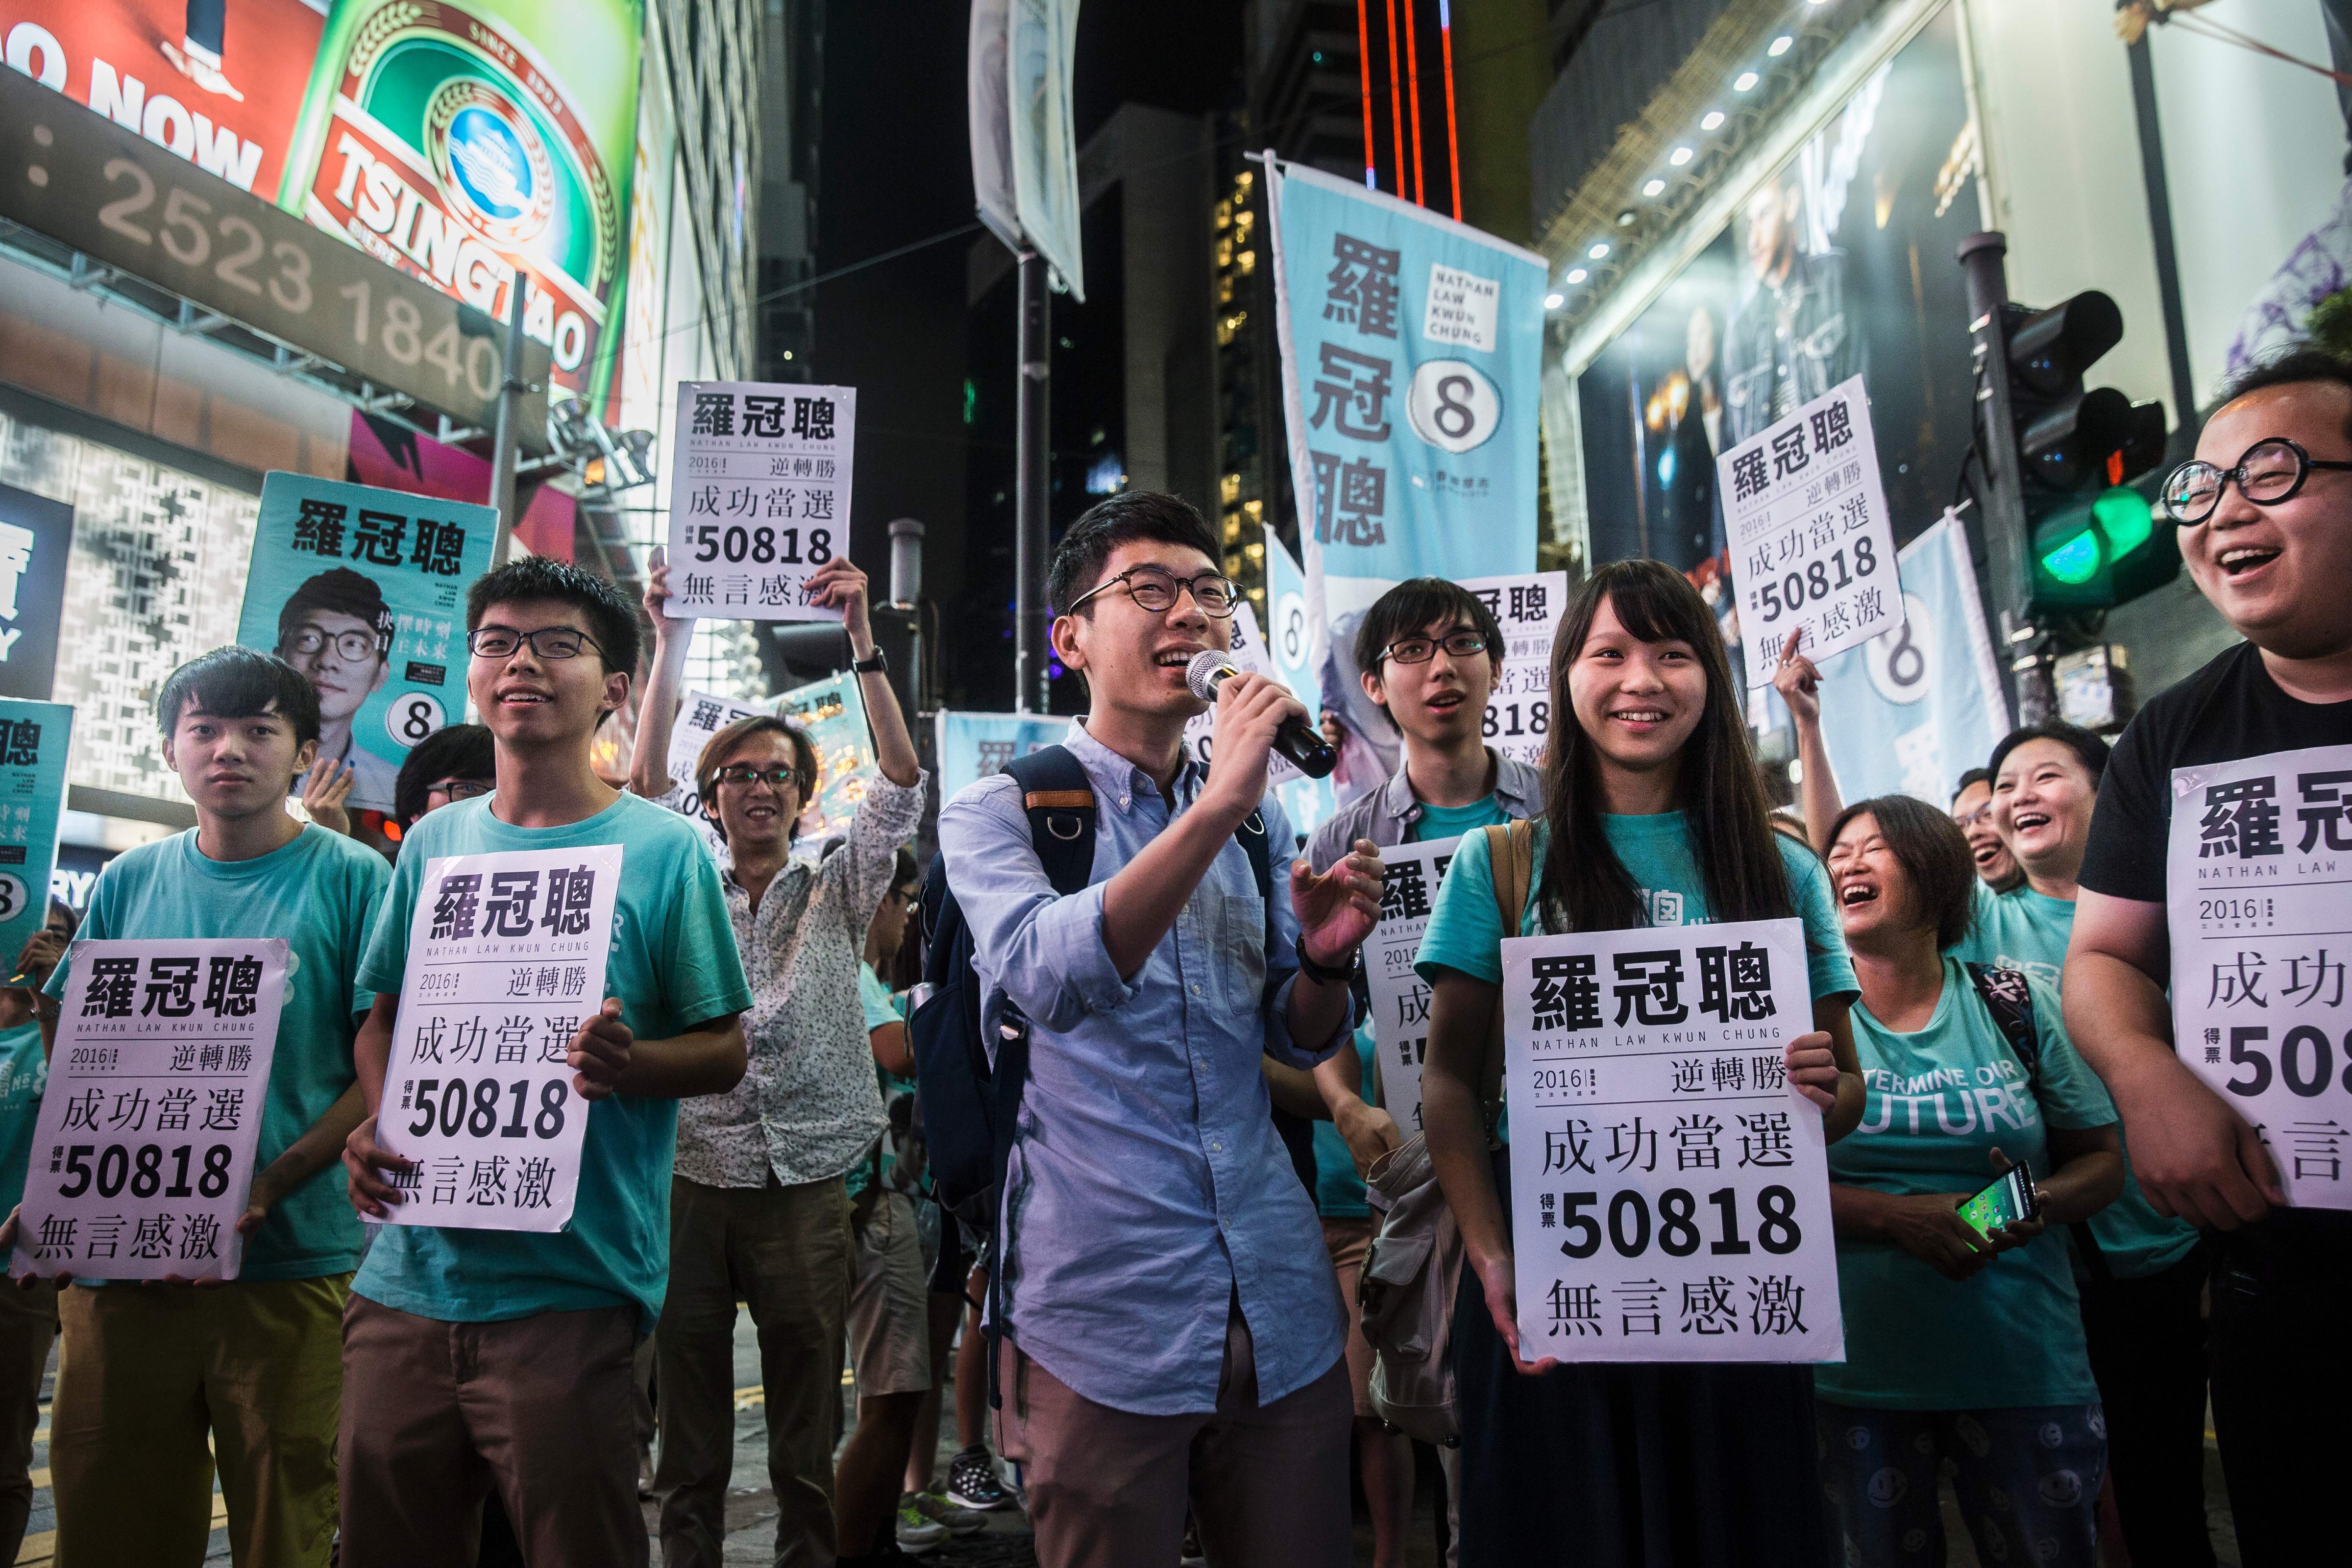 Nathan Law, center, speaks at a rally with pro-democracy activist Joshua Wong, second from left, and supporters in Causeway Bay following Law's win in the Legislative Council election in Hong Kong on Sept. 5, 2016 (Isaac Lawrence—AFP/Getty Images)